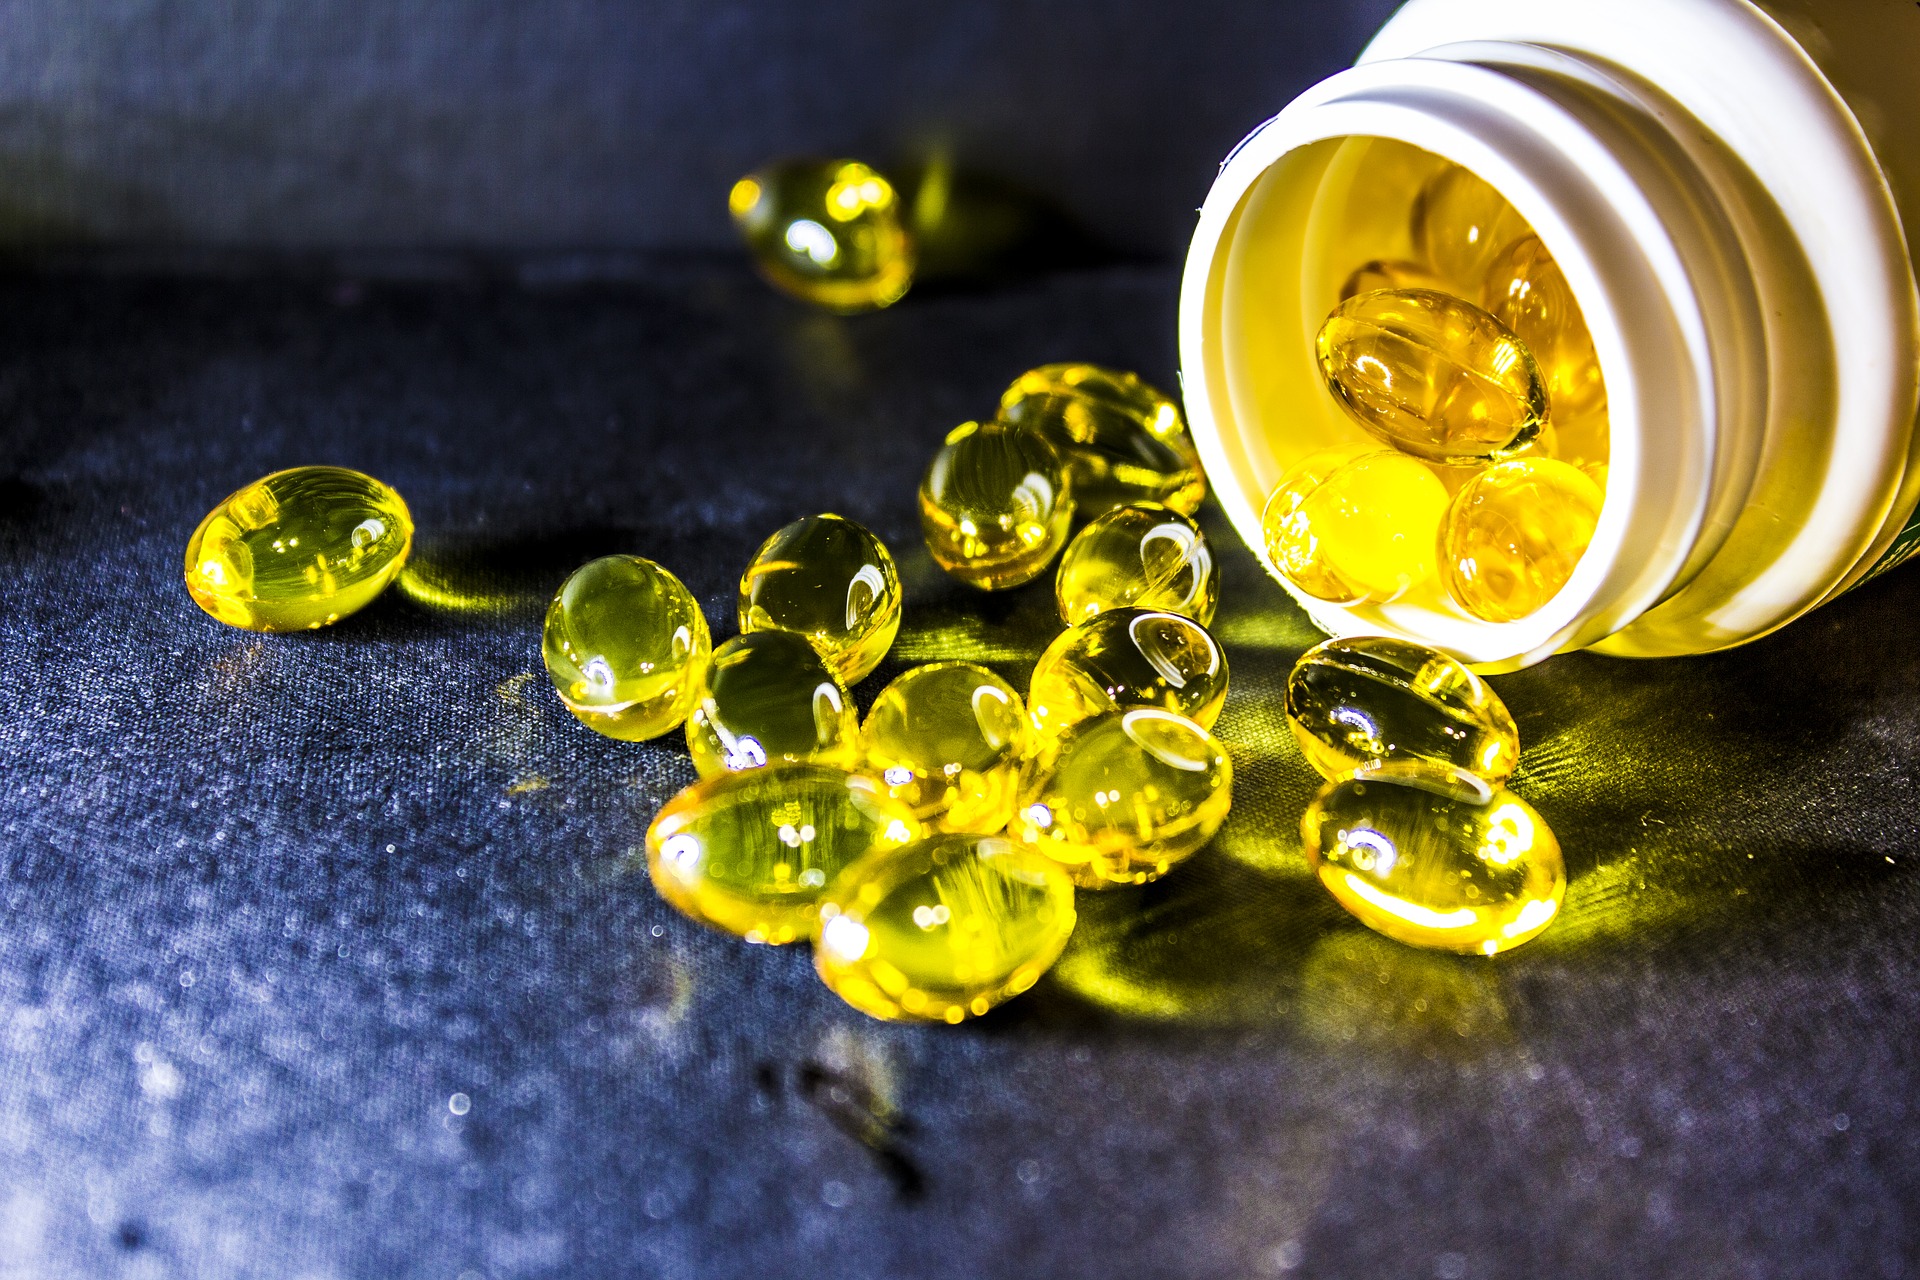 Omega3 Fish Oil May Be Better for Attention Than ADHD Drugs for Some